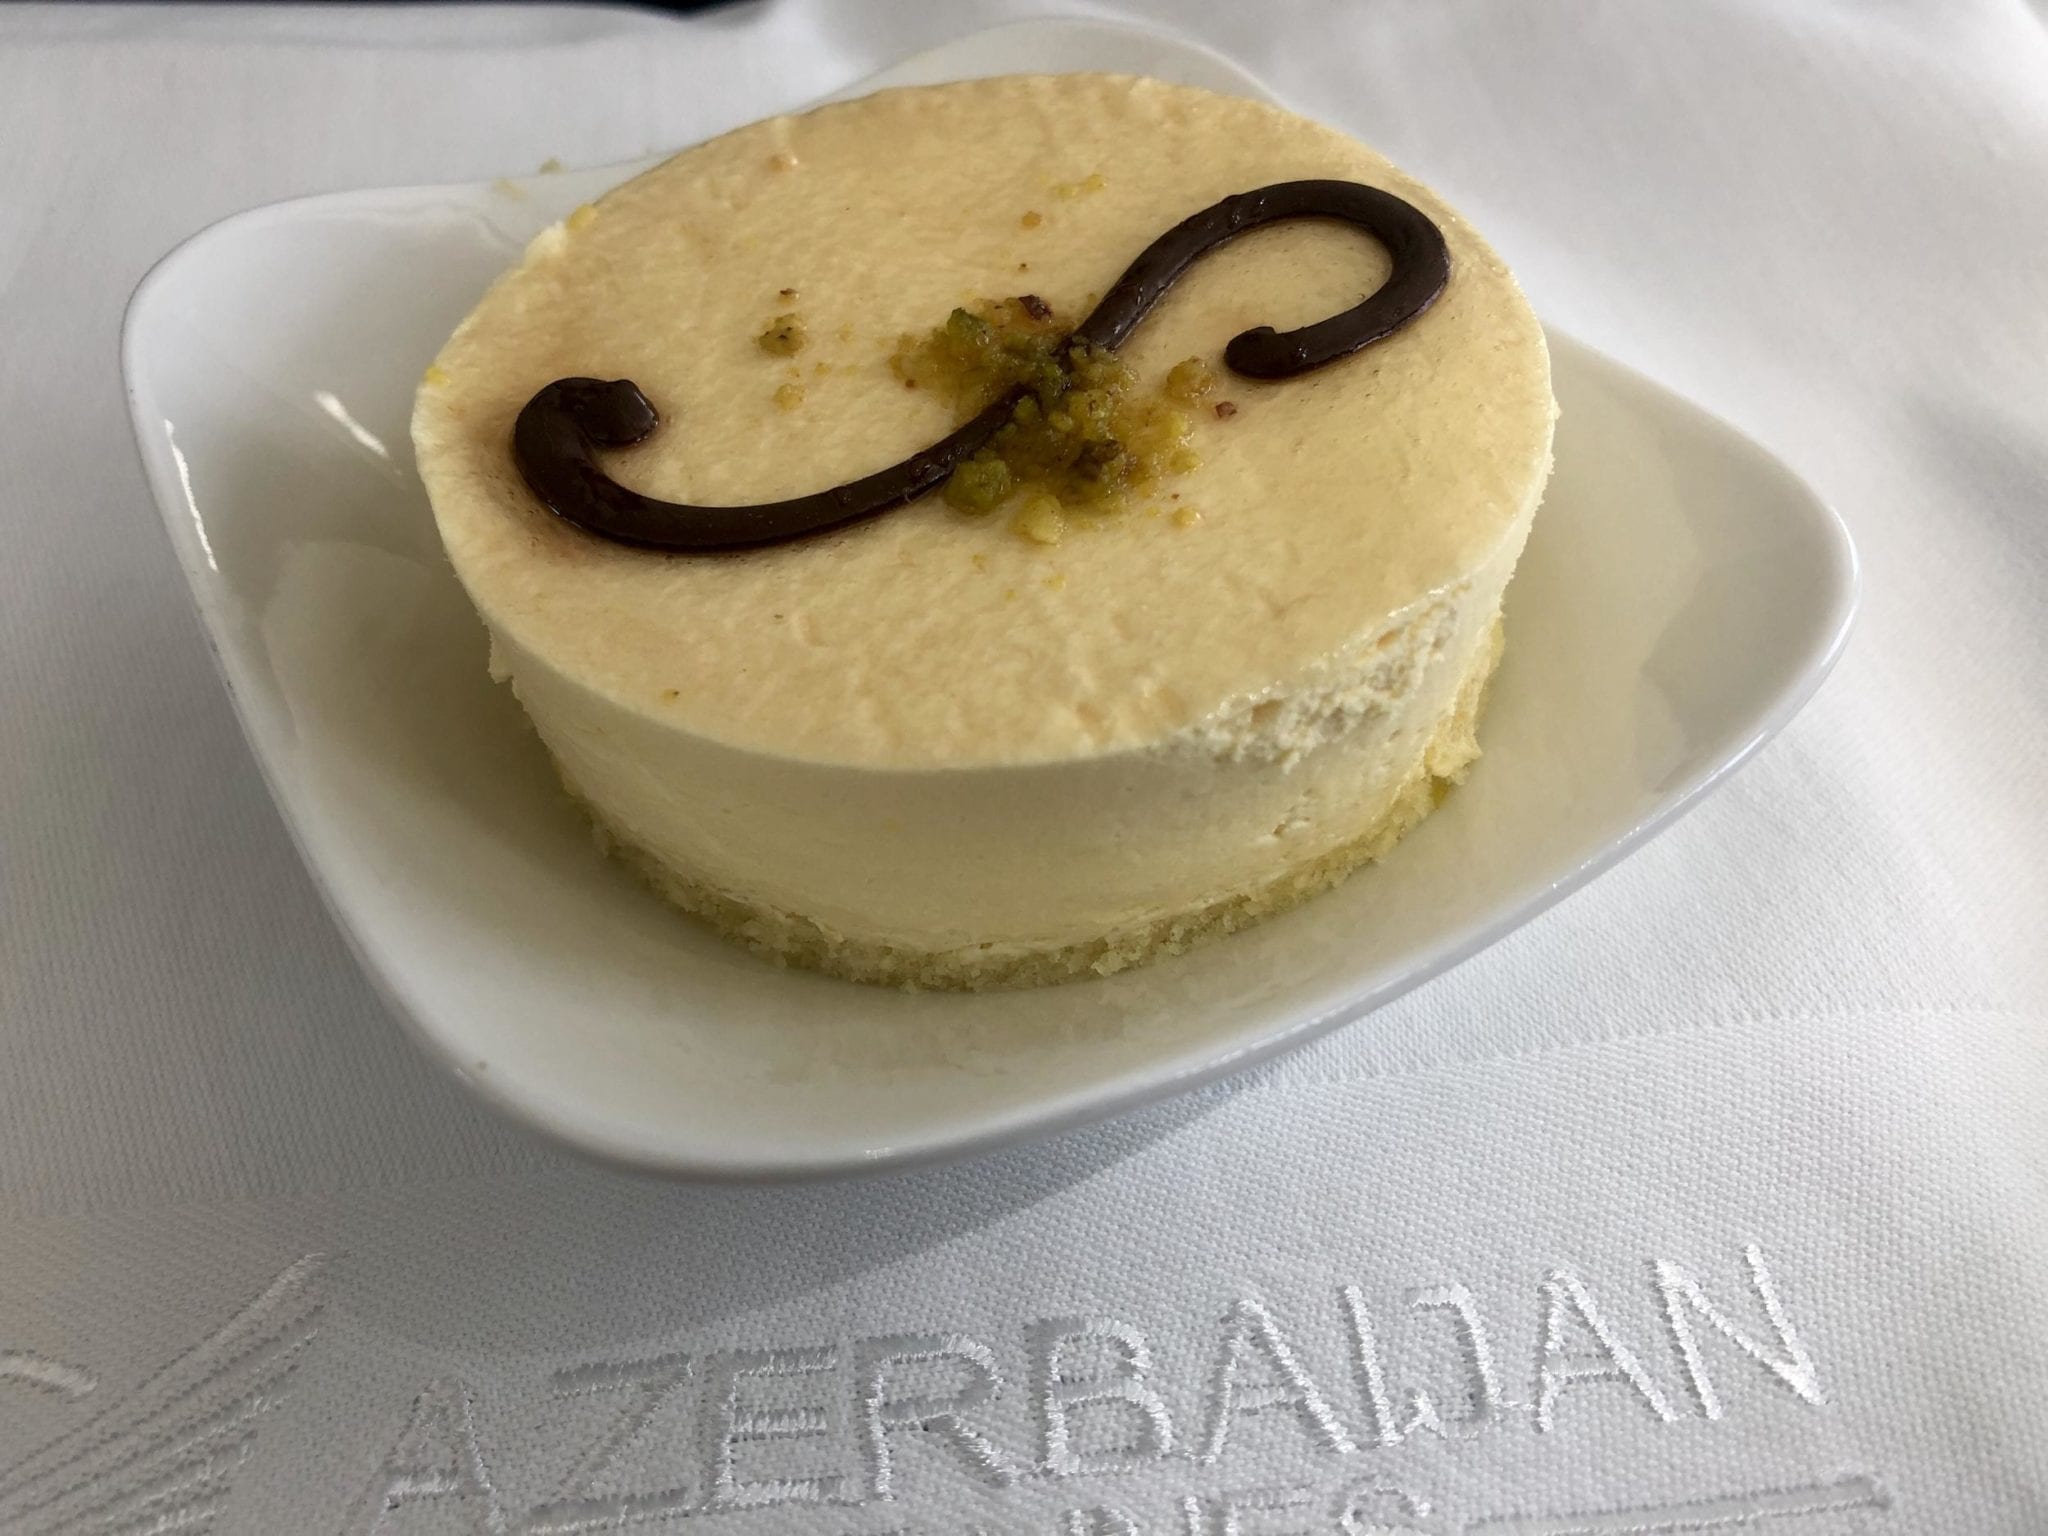 A cheesecake topped with a chocolate swirl in the Azerbaijan Airlines Comfort Club.